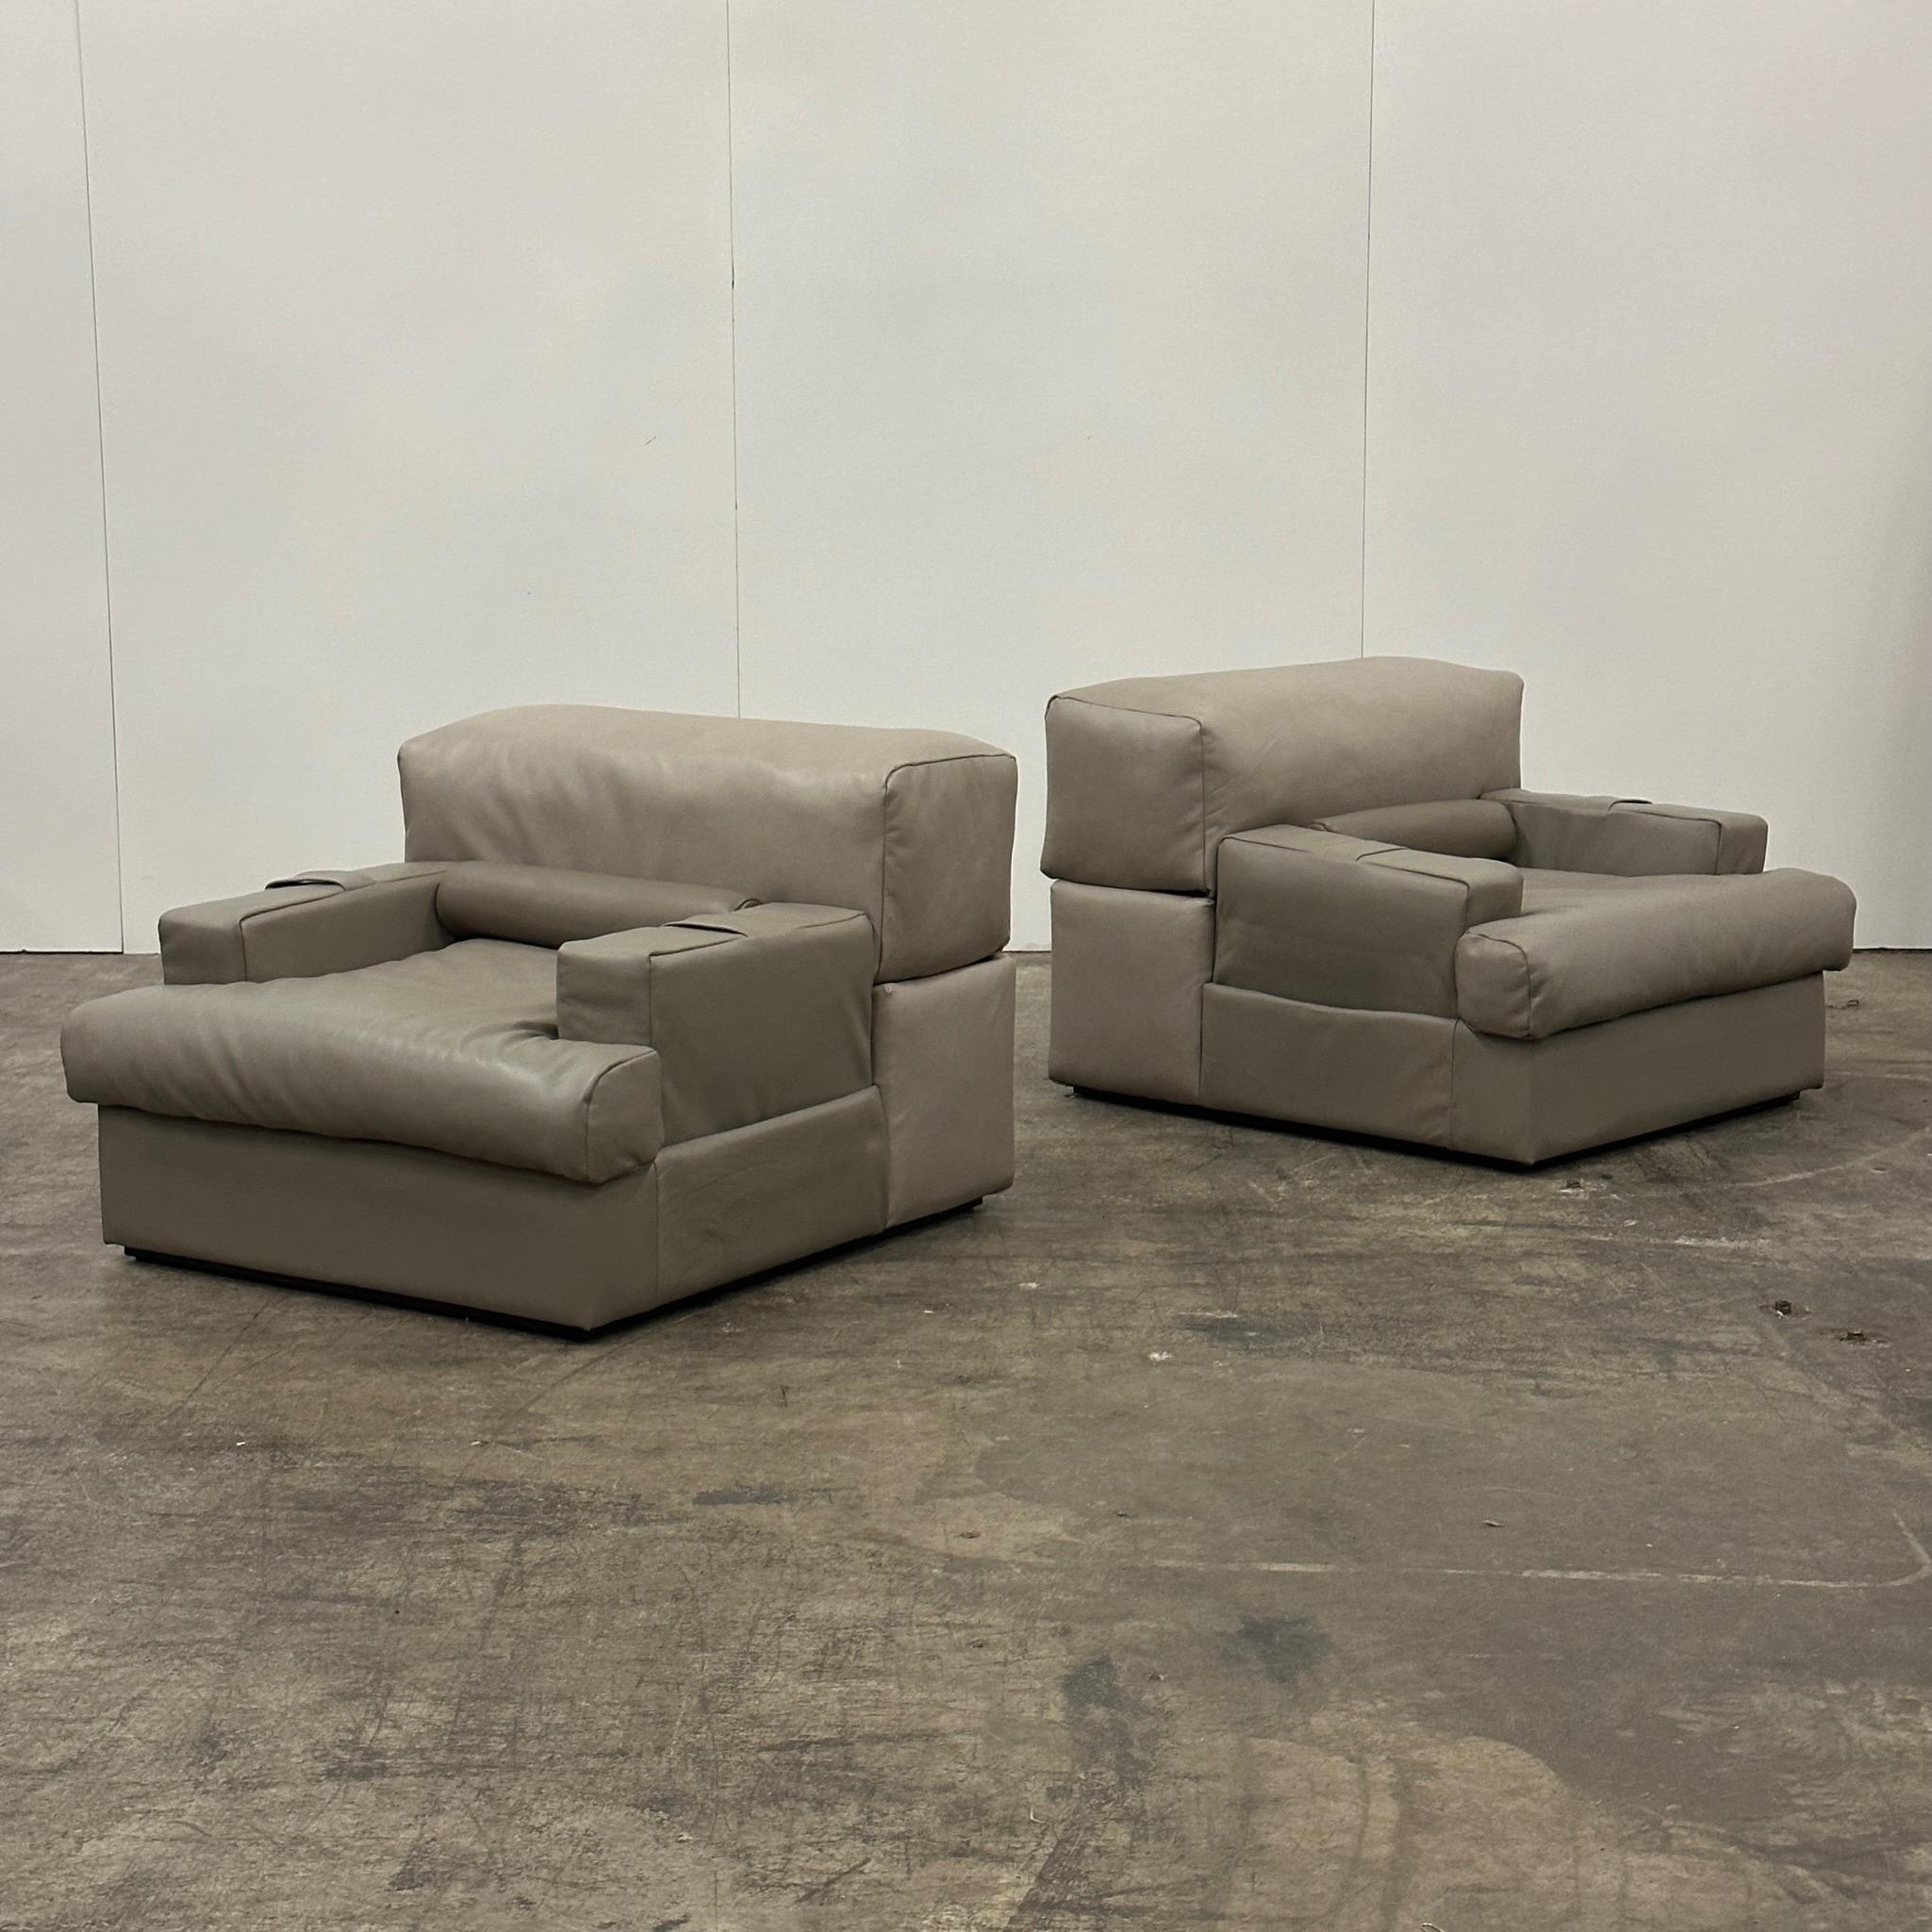 c. 1970s. Price is for the set. Contact us if you’d like to purchase a single item. Set of three adjustable armrest sofa/chairs, fully reupholstered in gradient grey tonal leather. Each section matches the same section on the other pieces, but the